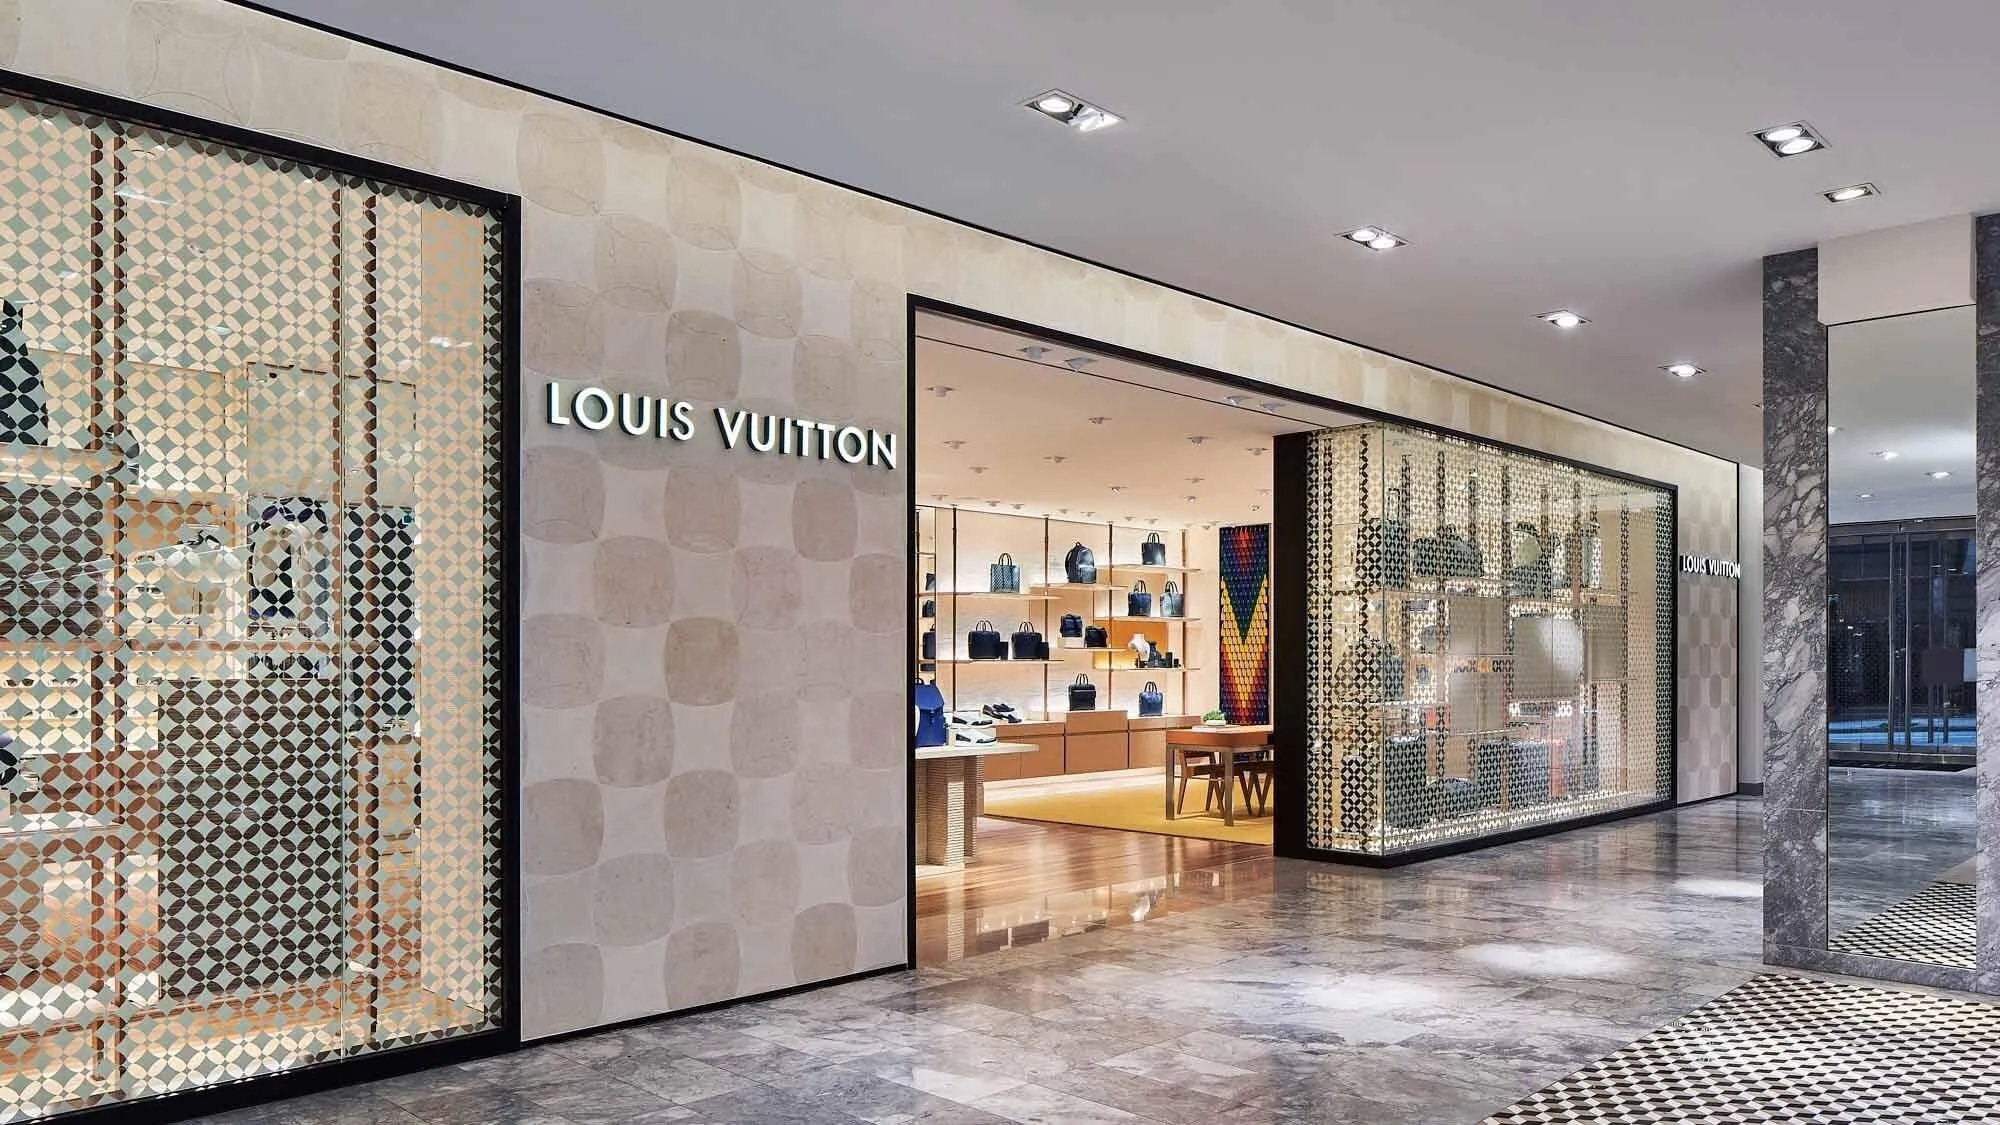 Louis Vuitton Holt Renfrew Vancouver in Canada, north_america | Handbags,Accessories,Travel Bags - Country Helper